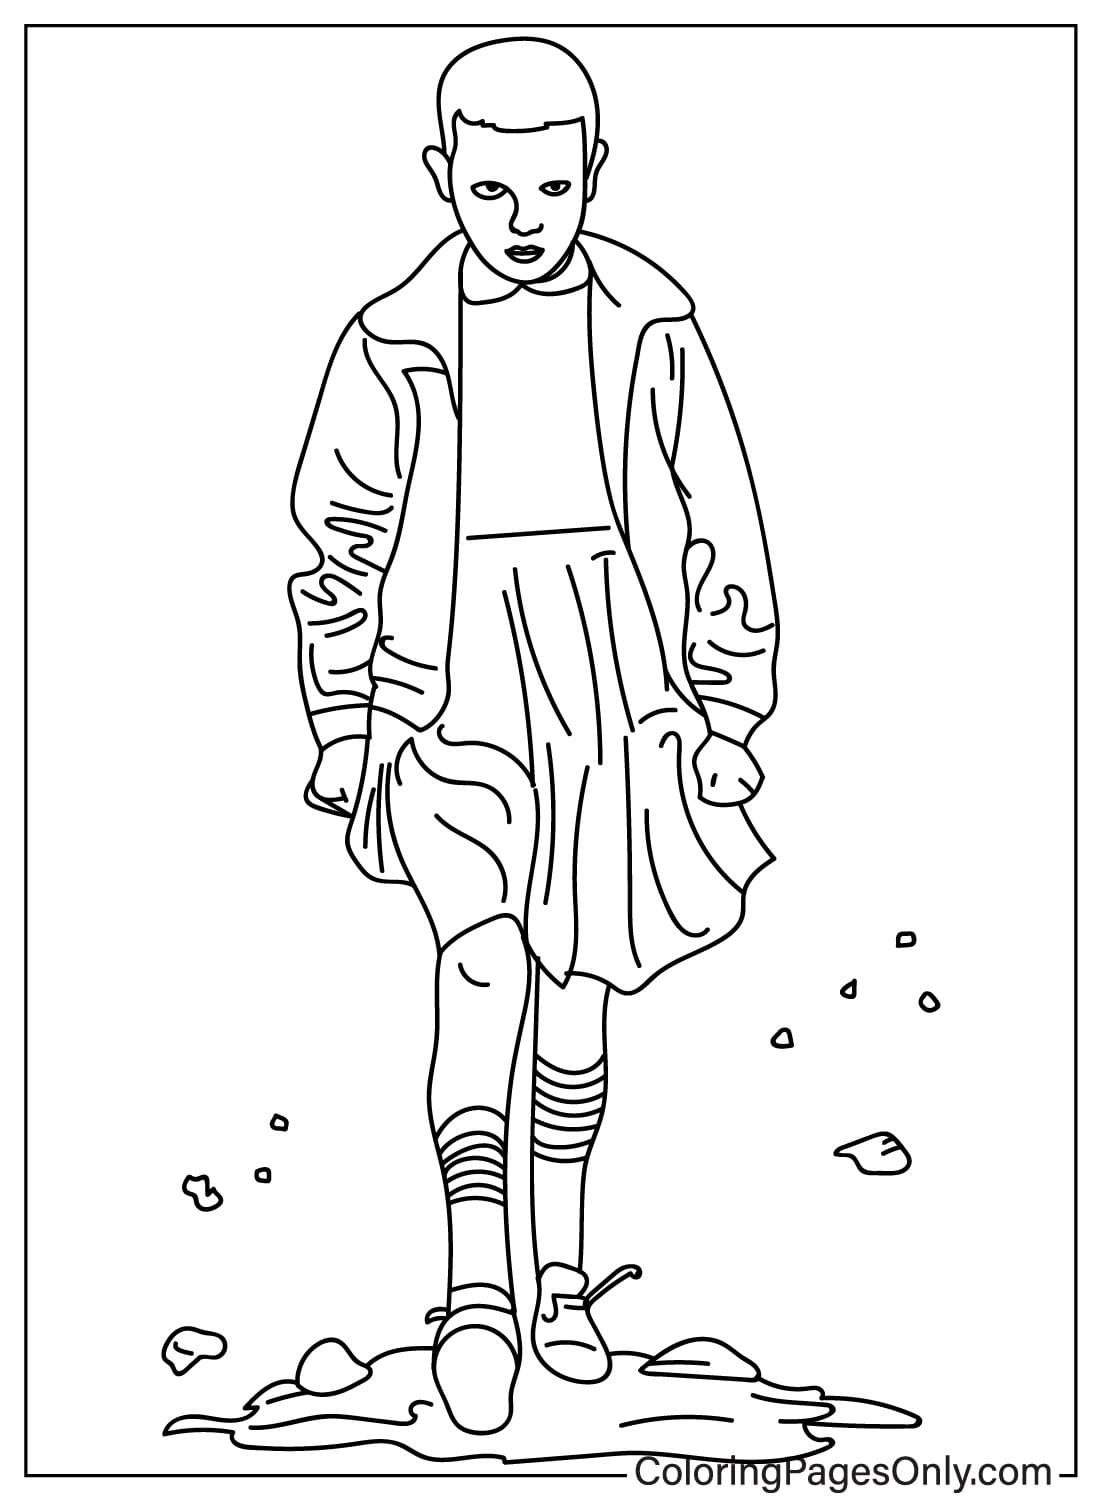 Stranger Things Coloring Page from Stranger Things